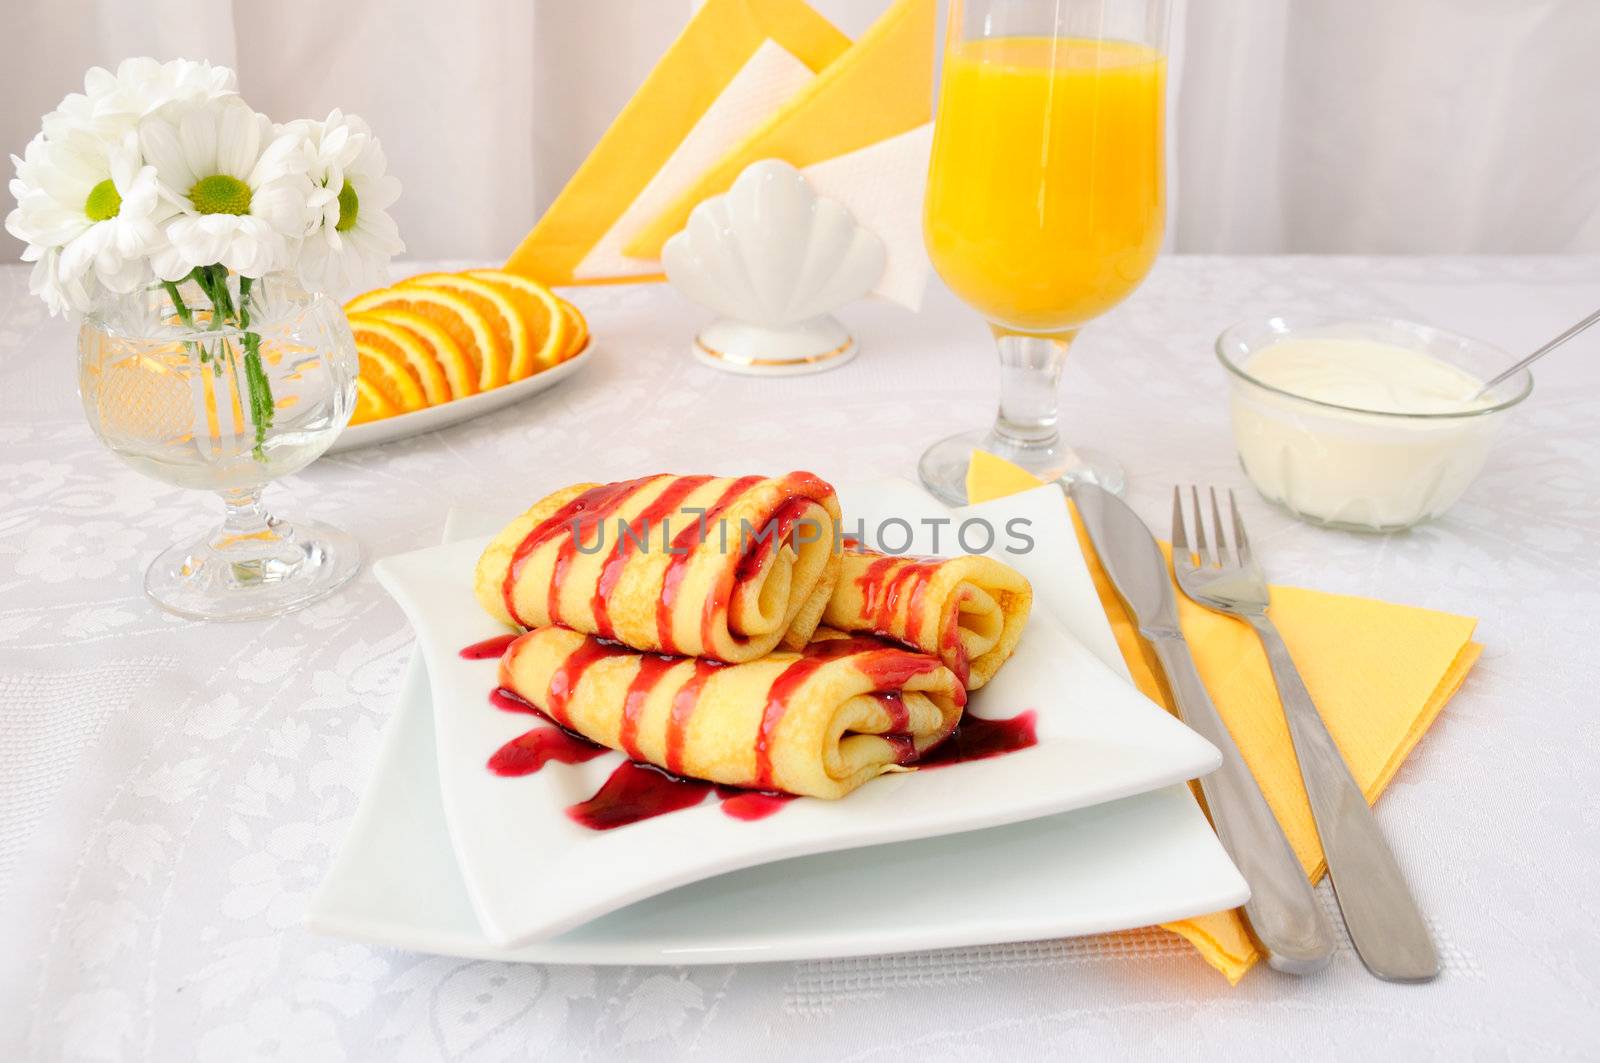 Breakfast with pancakes poured cherry syrup and orange juice